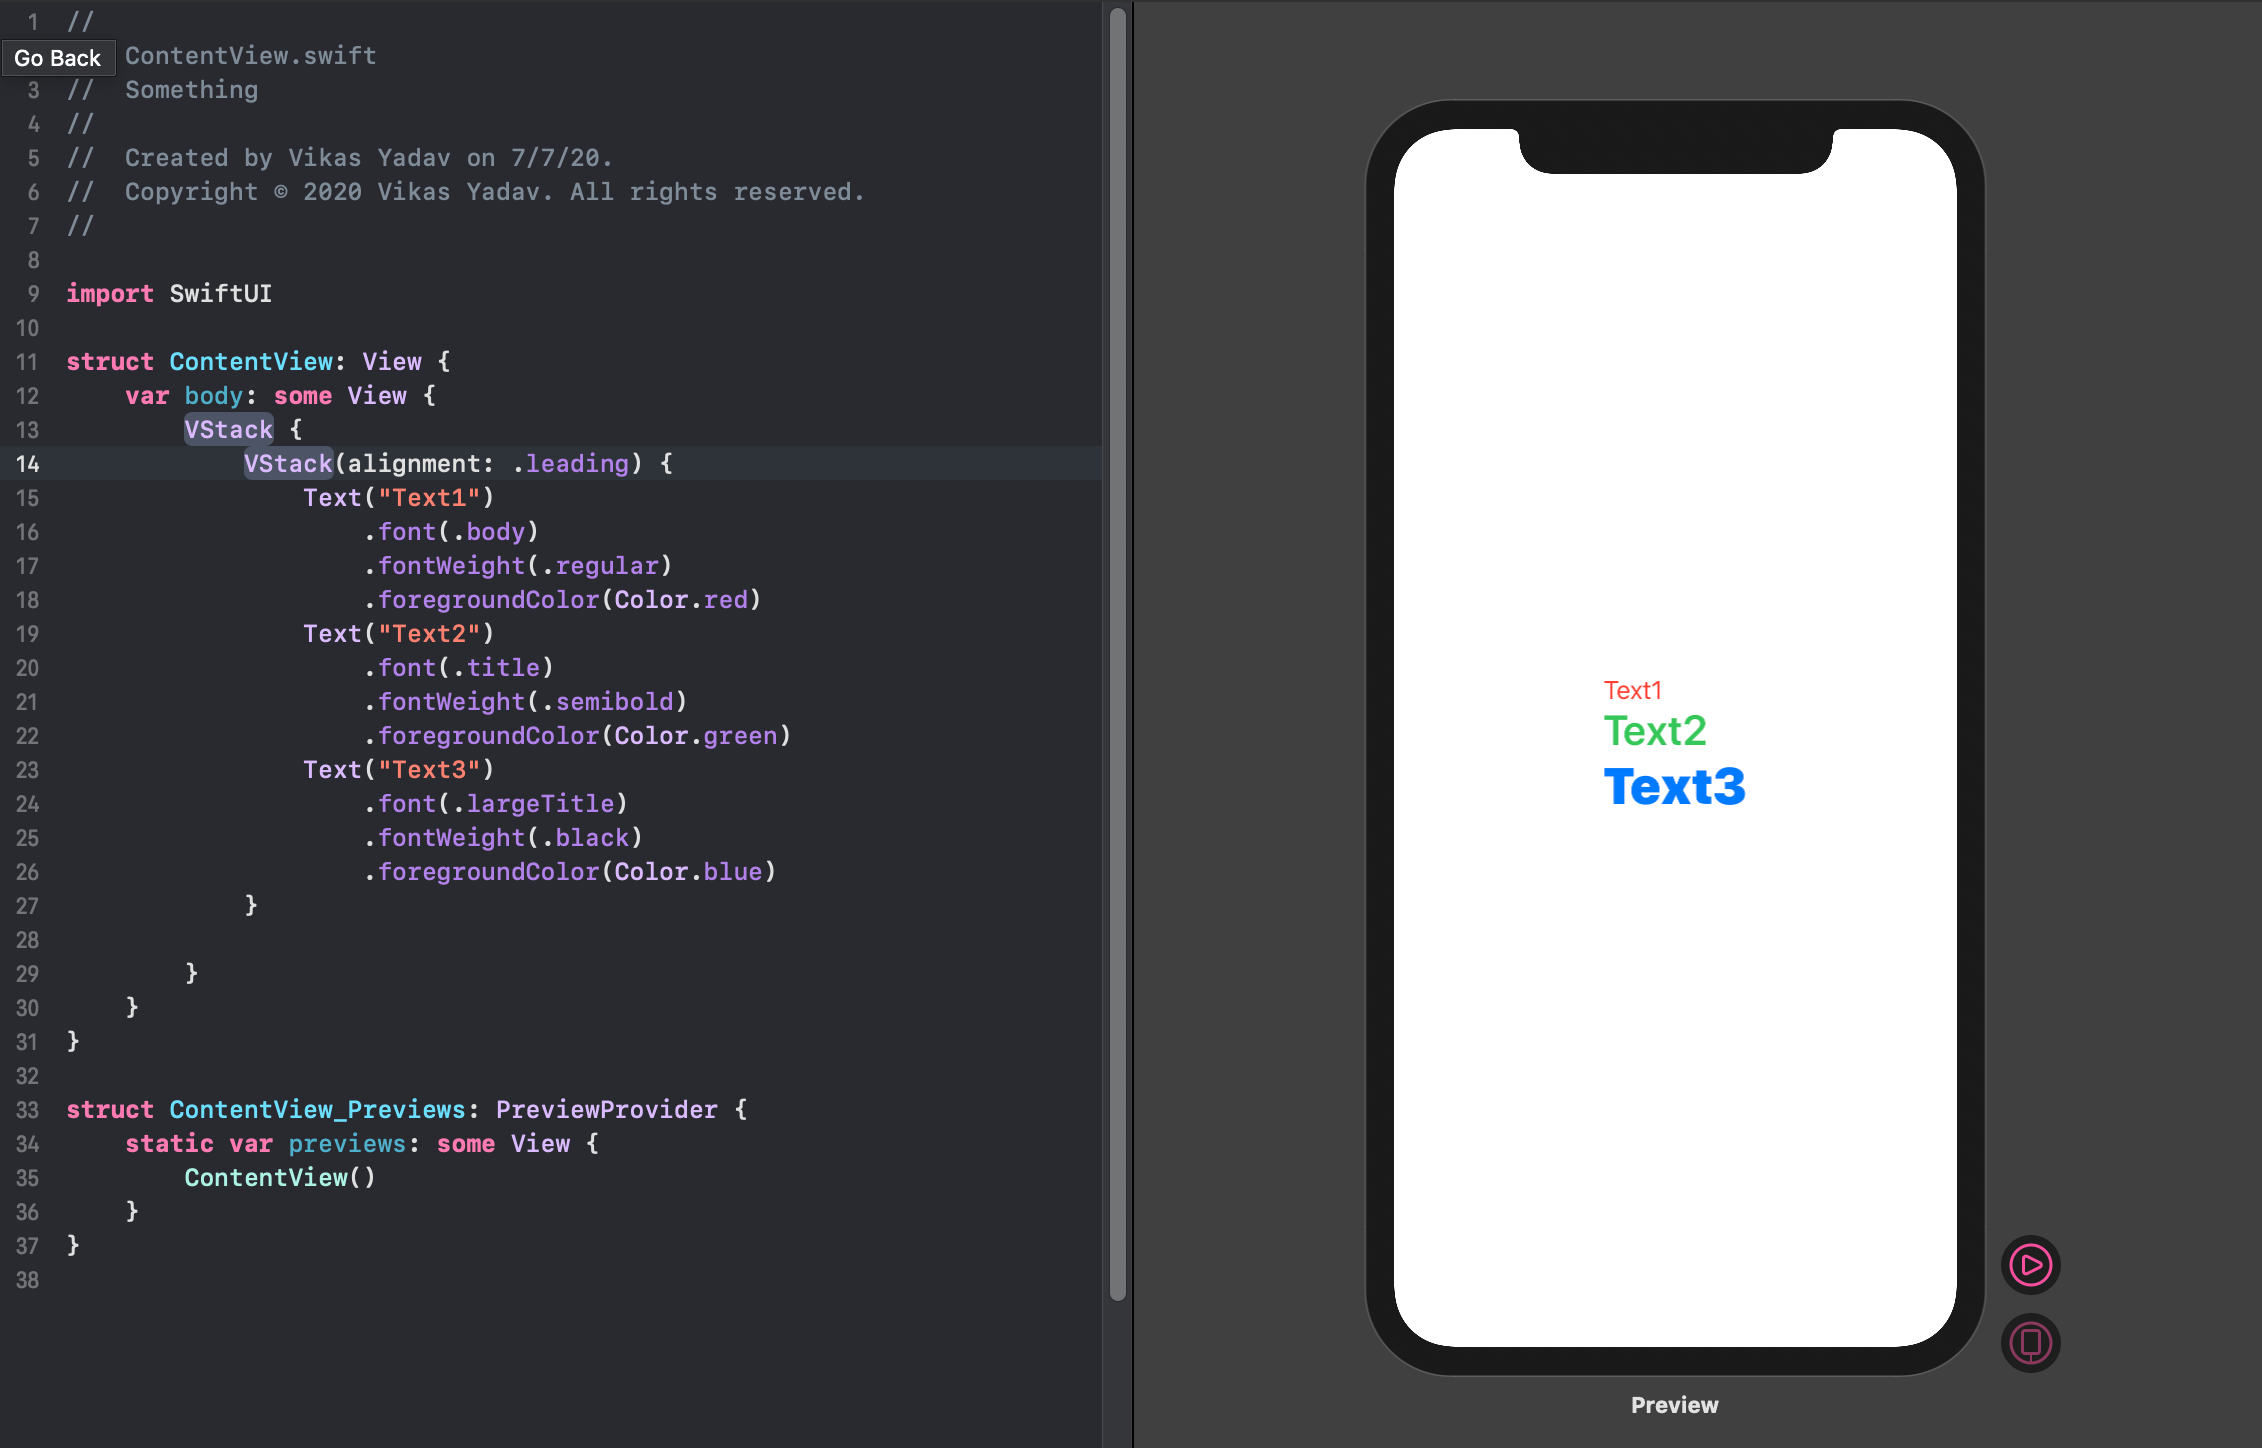 In SwiftUI styling is paired to each element, making it easier to read the code.